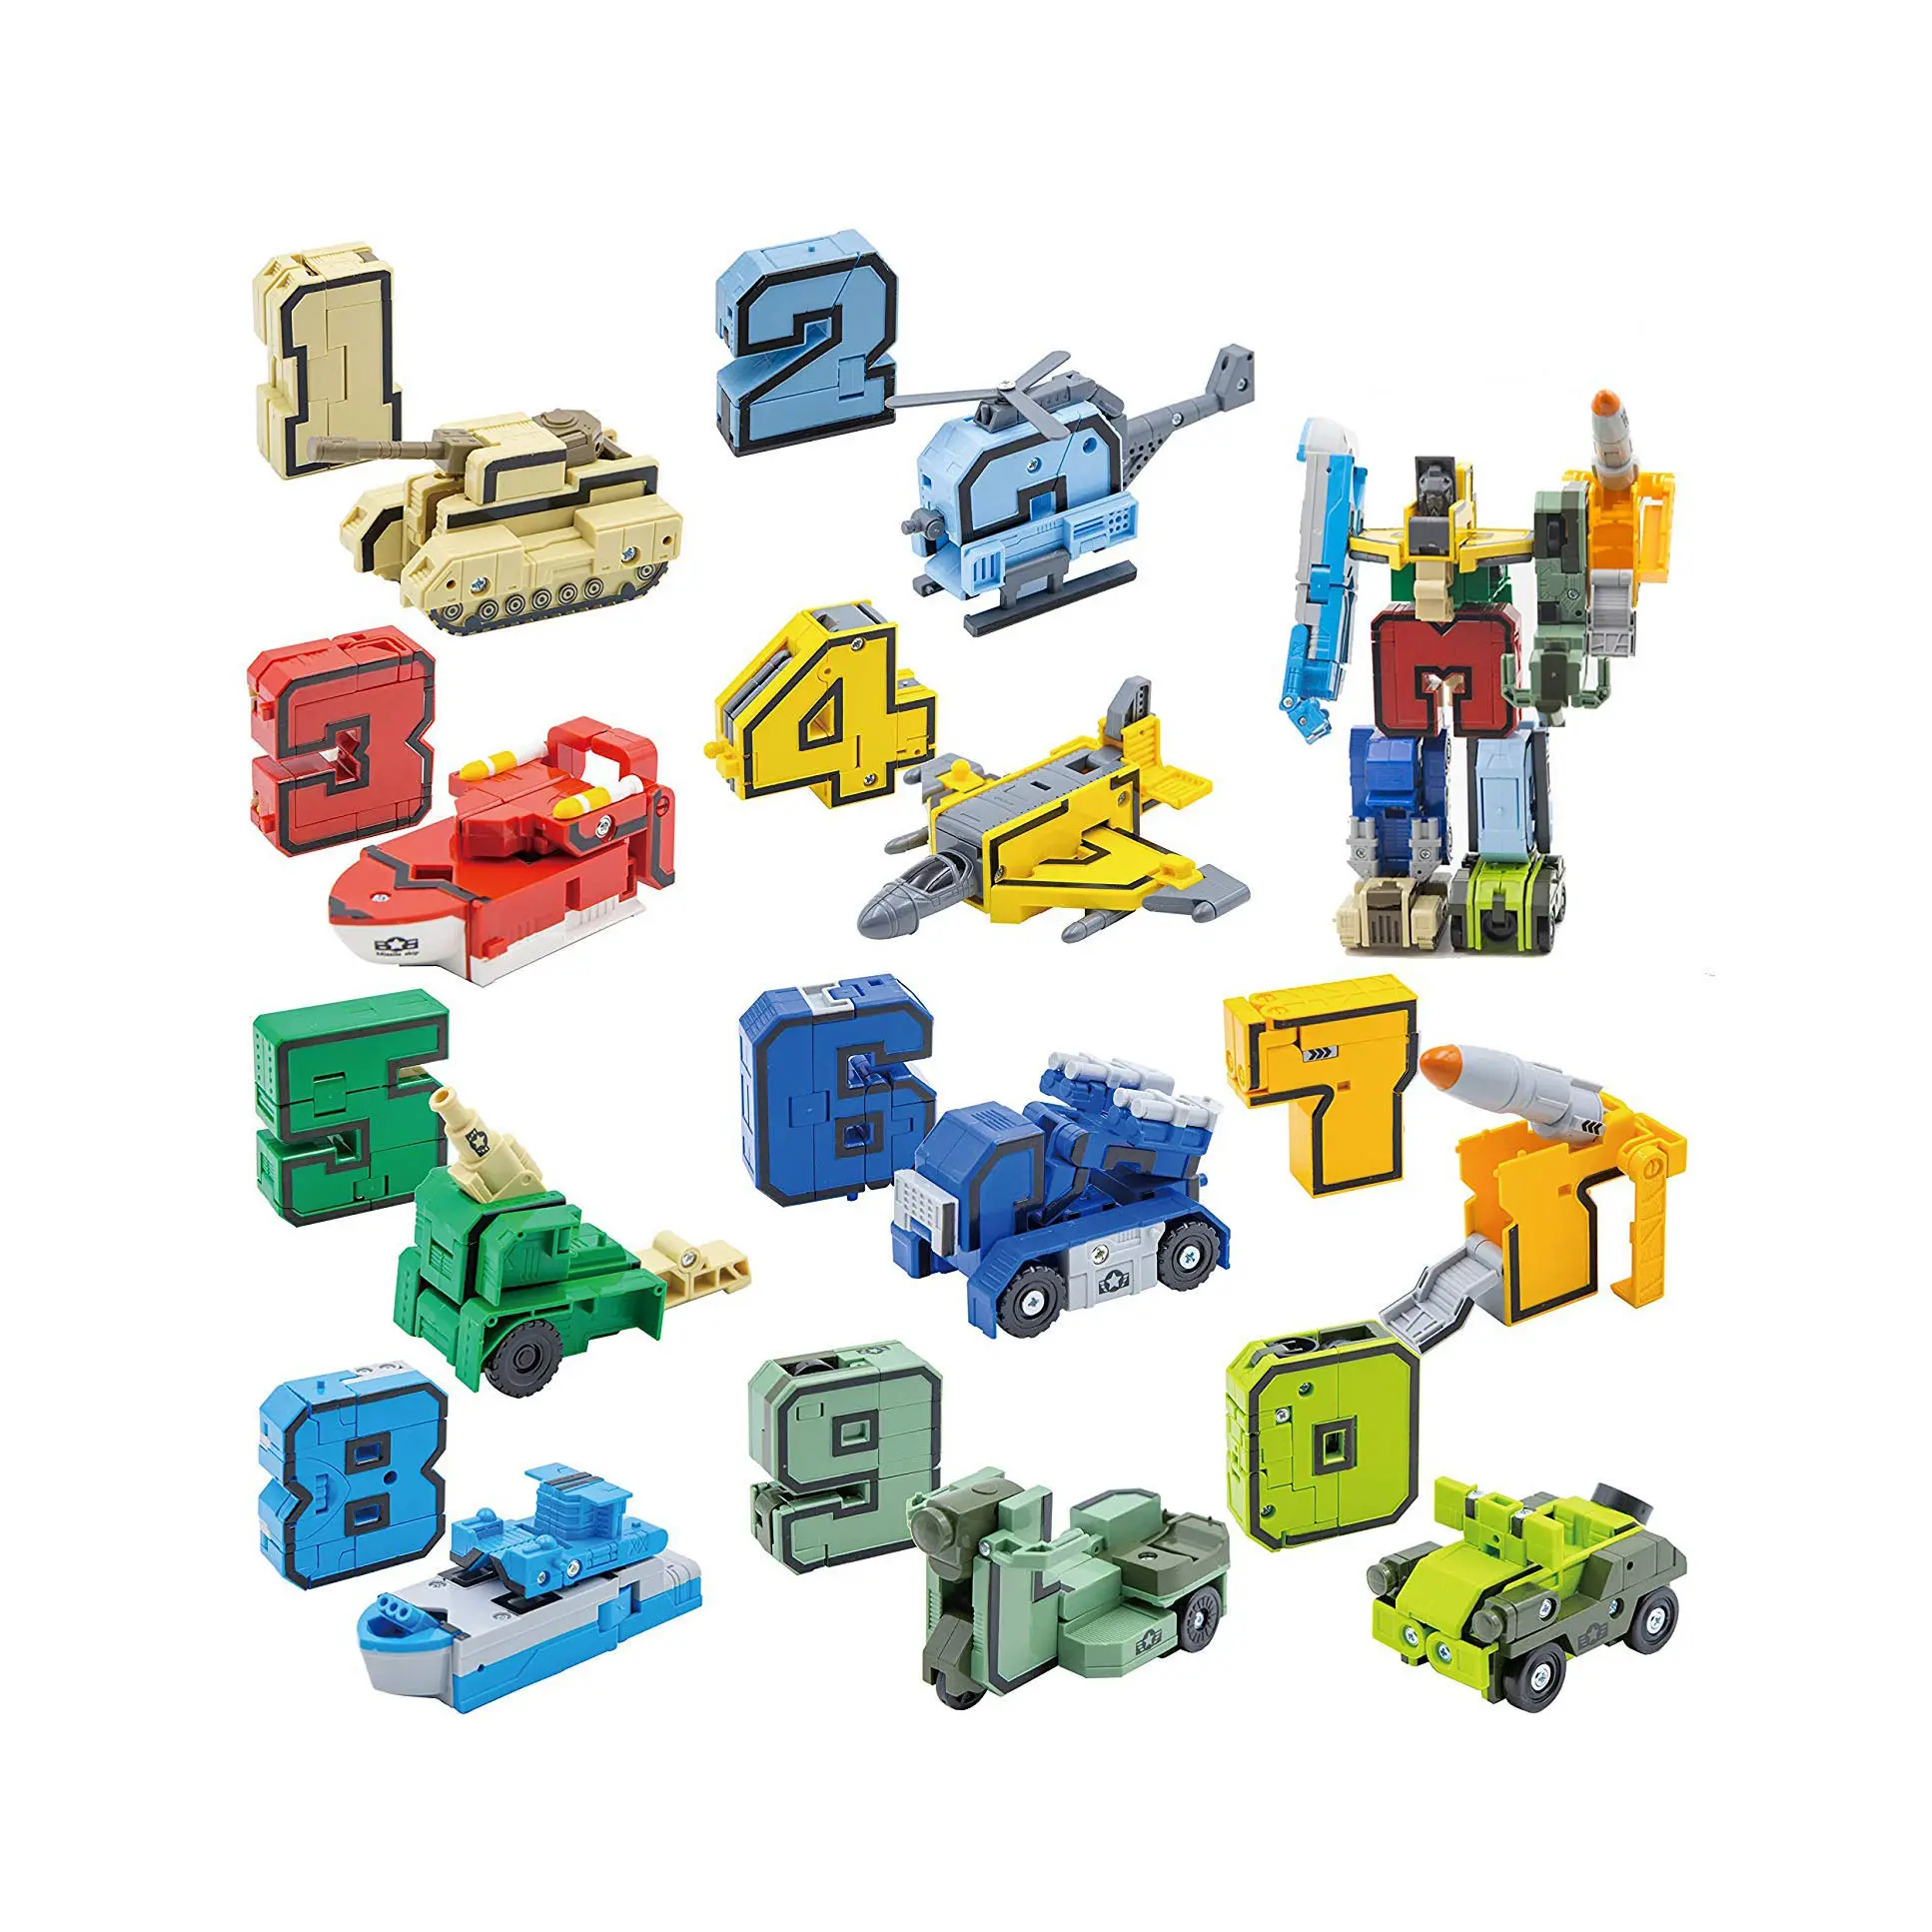 10 Pieces Number Robot Action Figure Autobots Toys for Easter Basket Stuffers, School Classroom Rewards Pre-School Education Toy